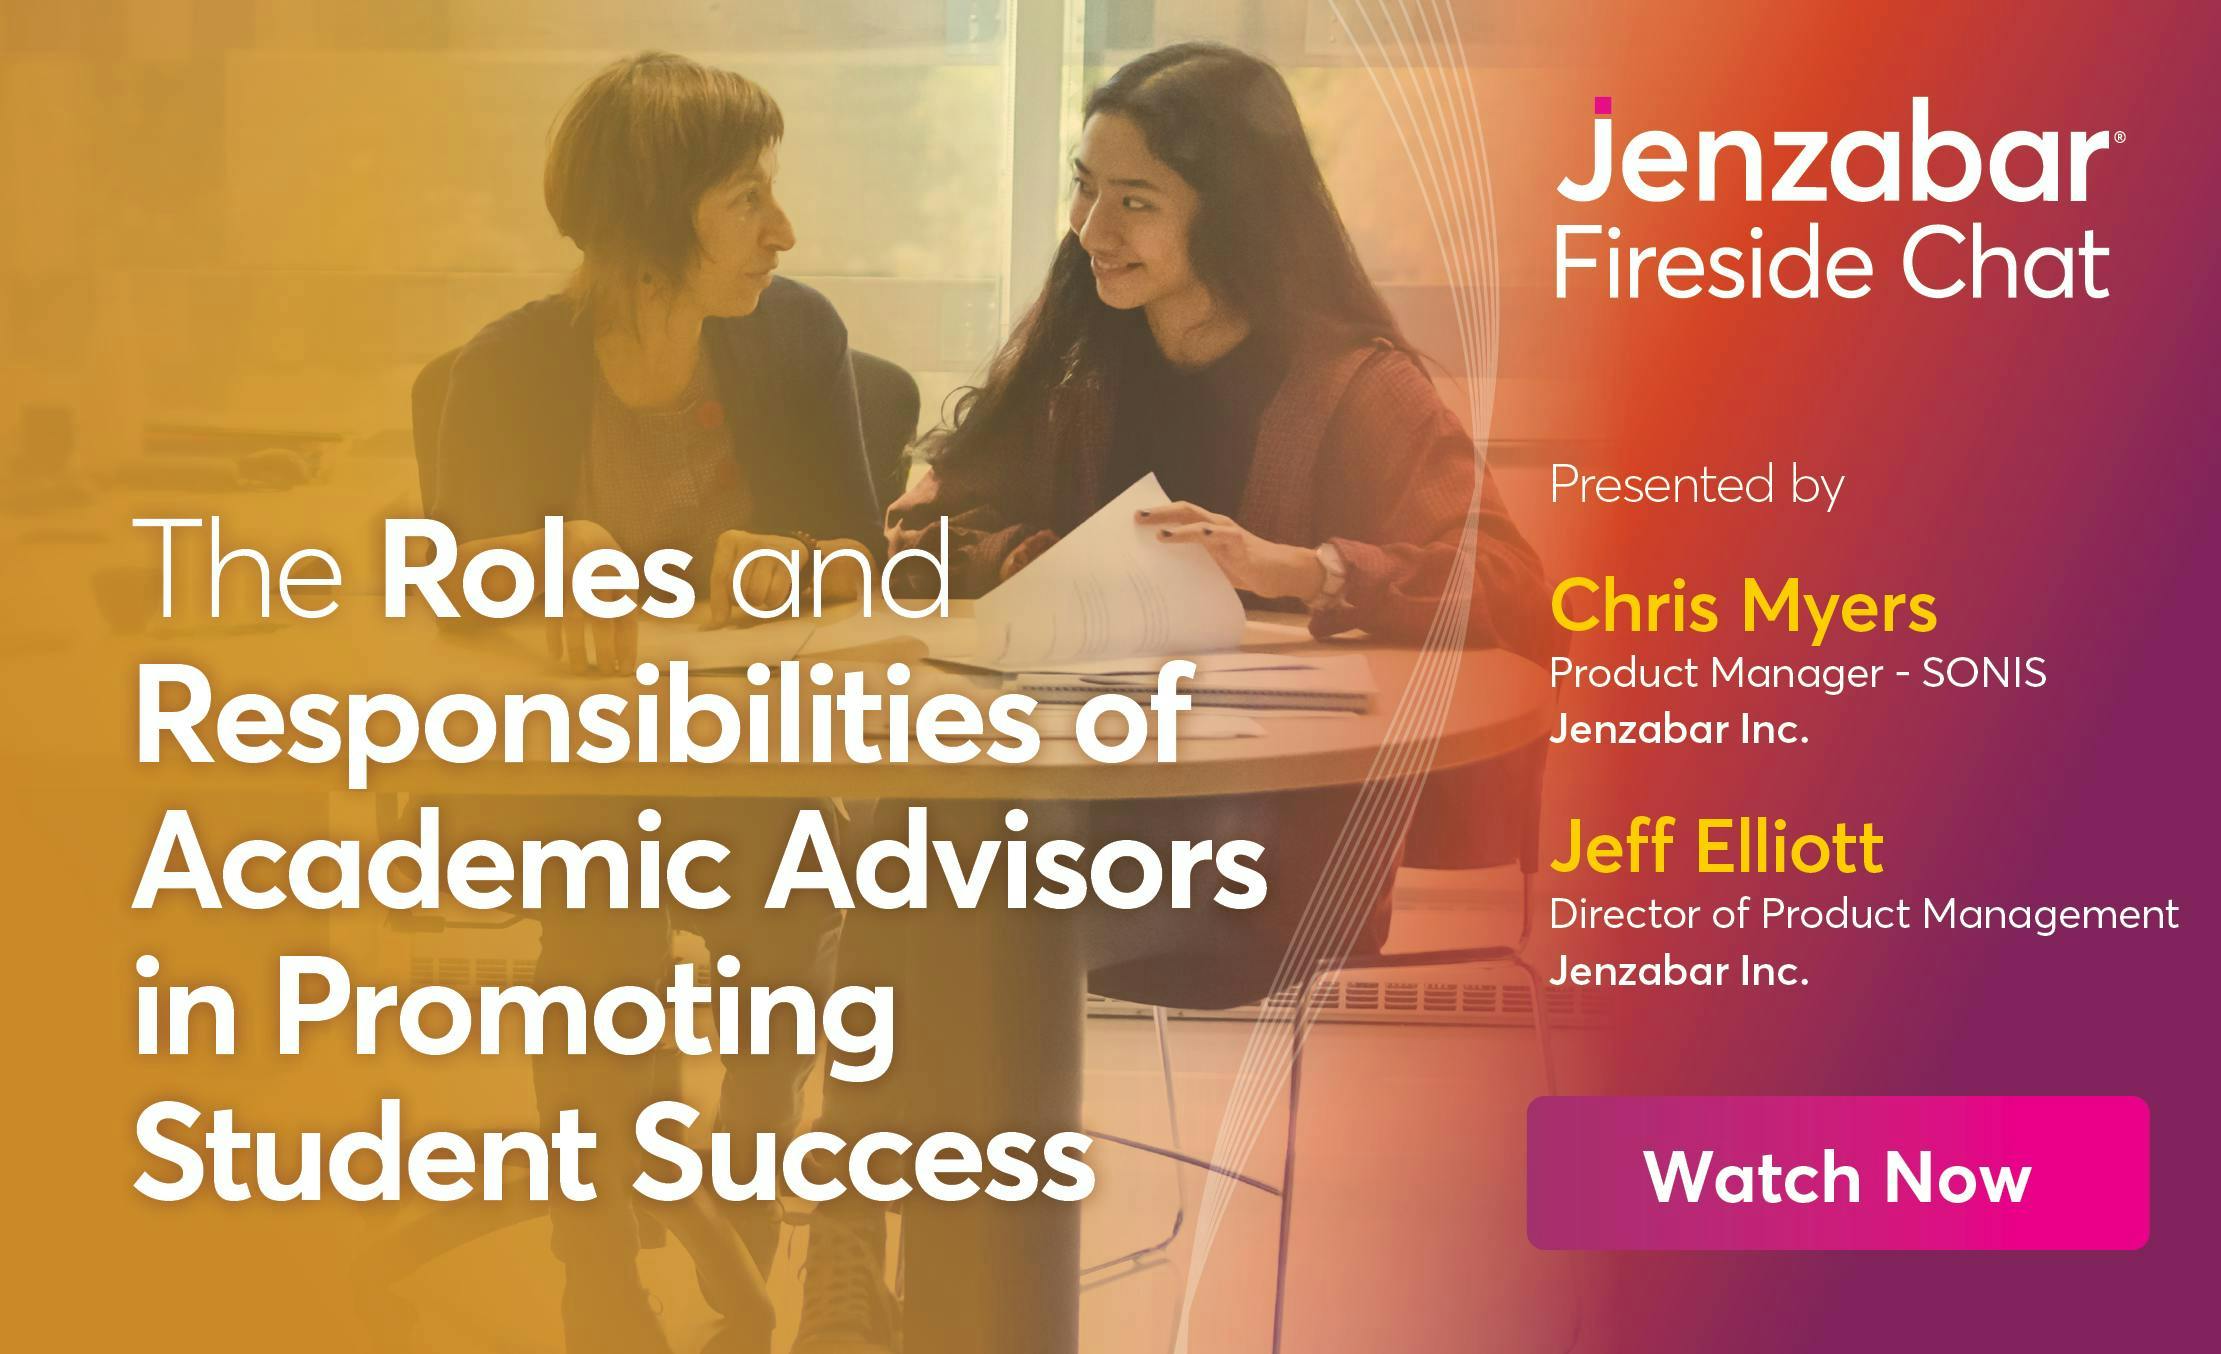 The Roles and Responsibilities of Academic Advisors in Promoting Student Success